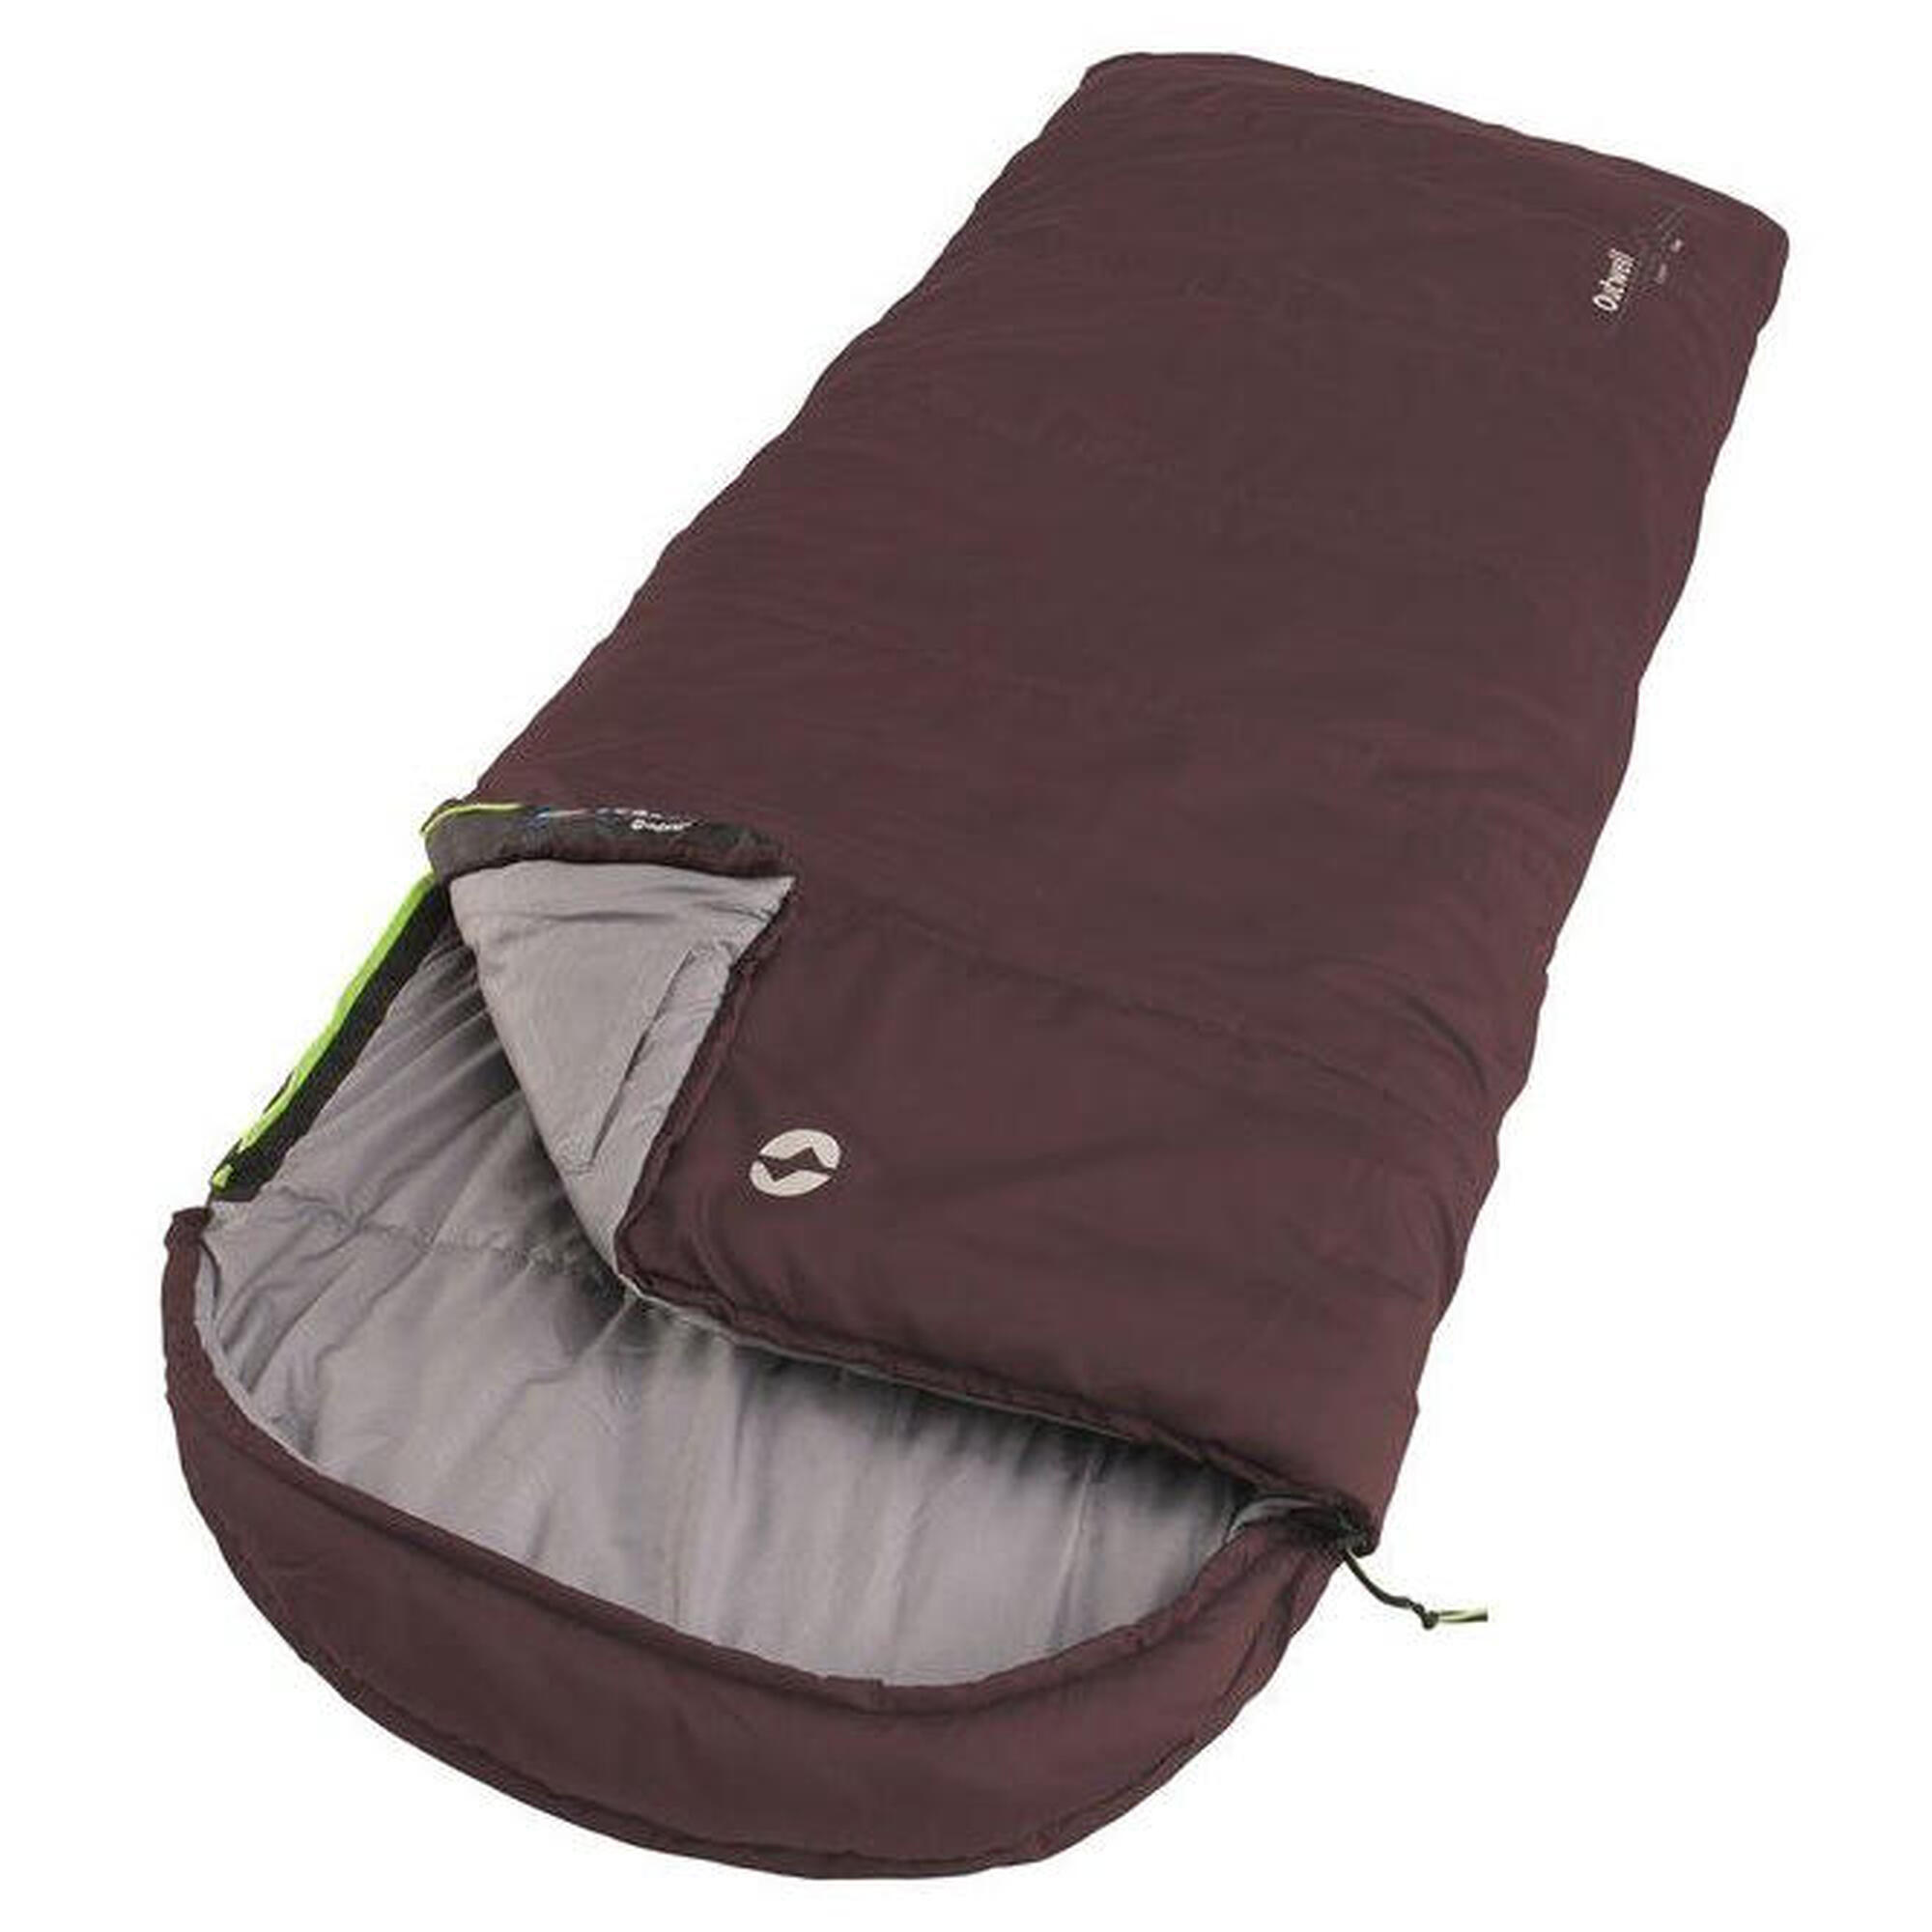 Sac de couchage Outwell Campion Lux - Aubergine